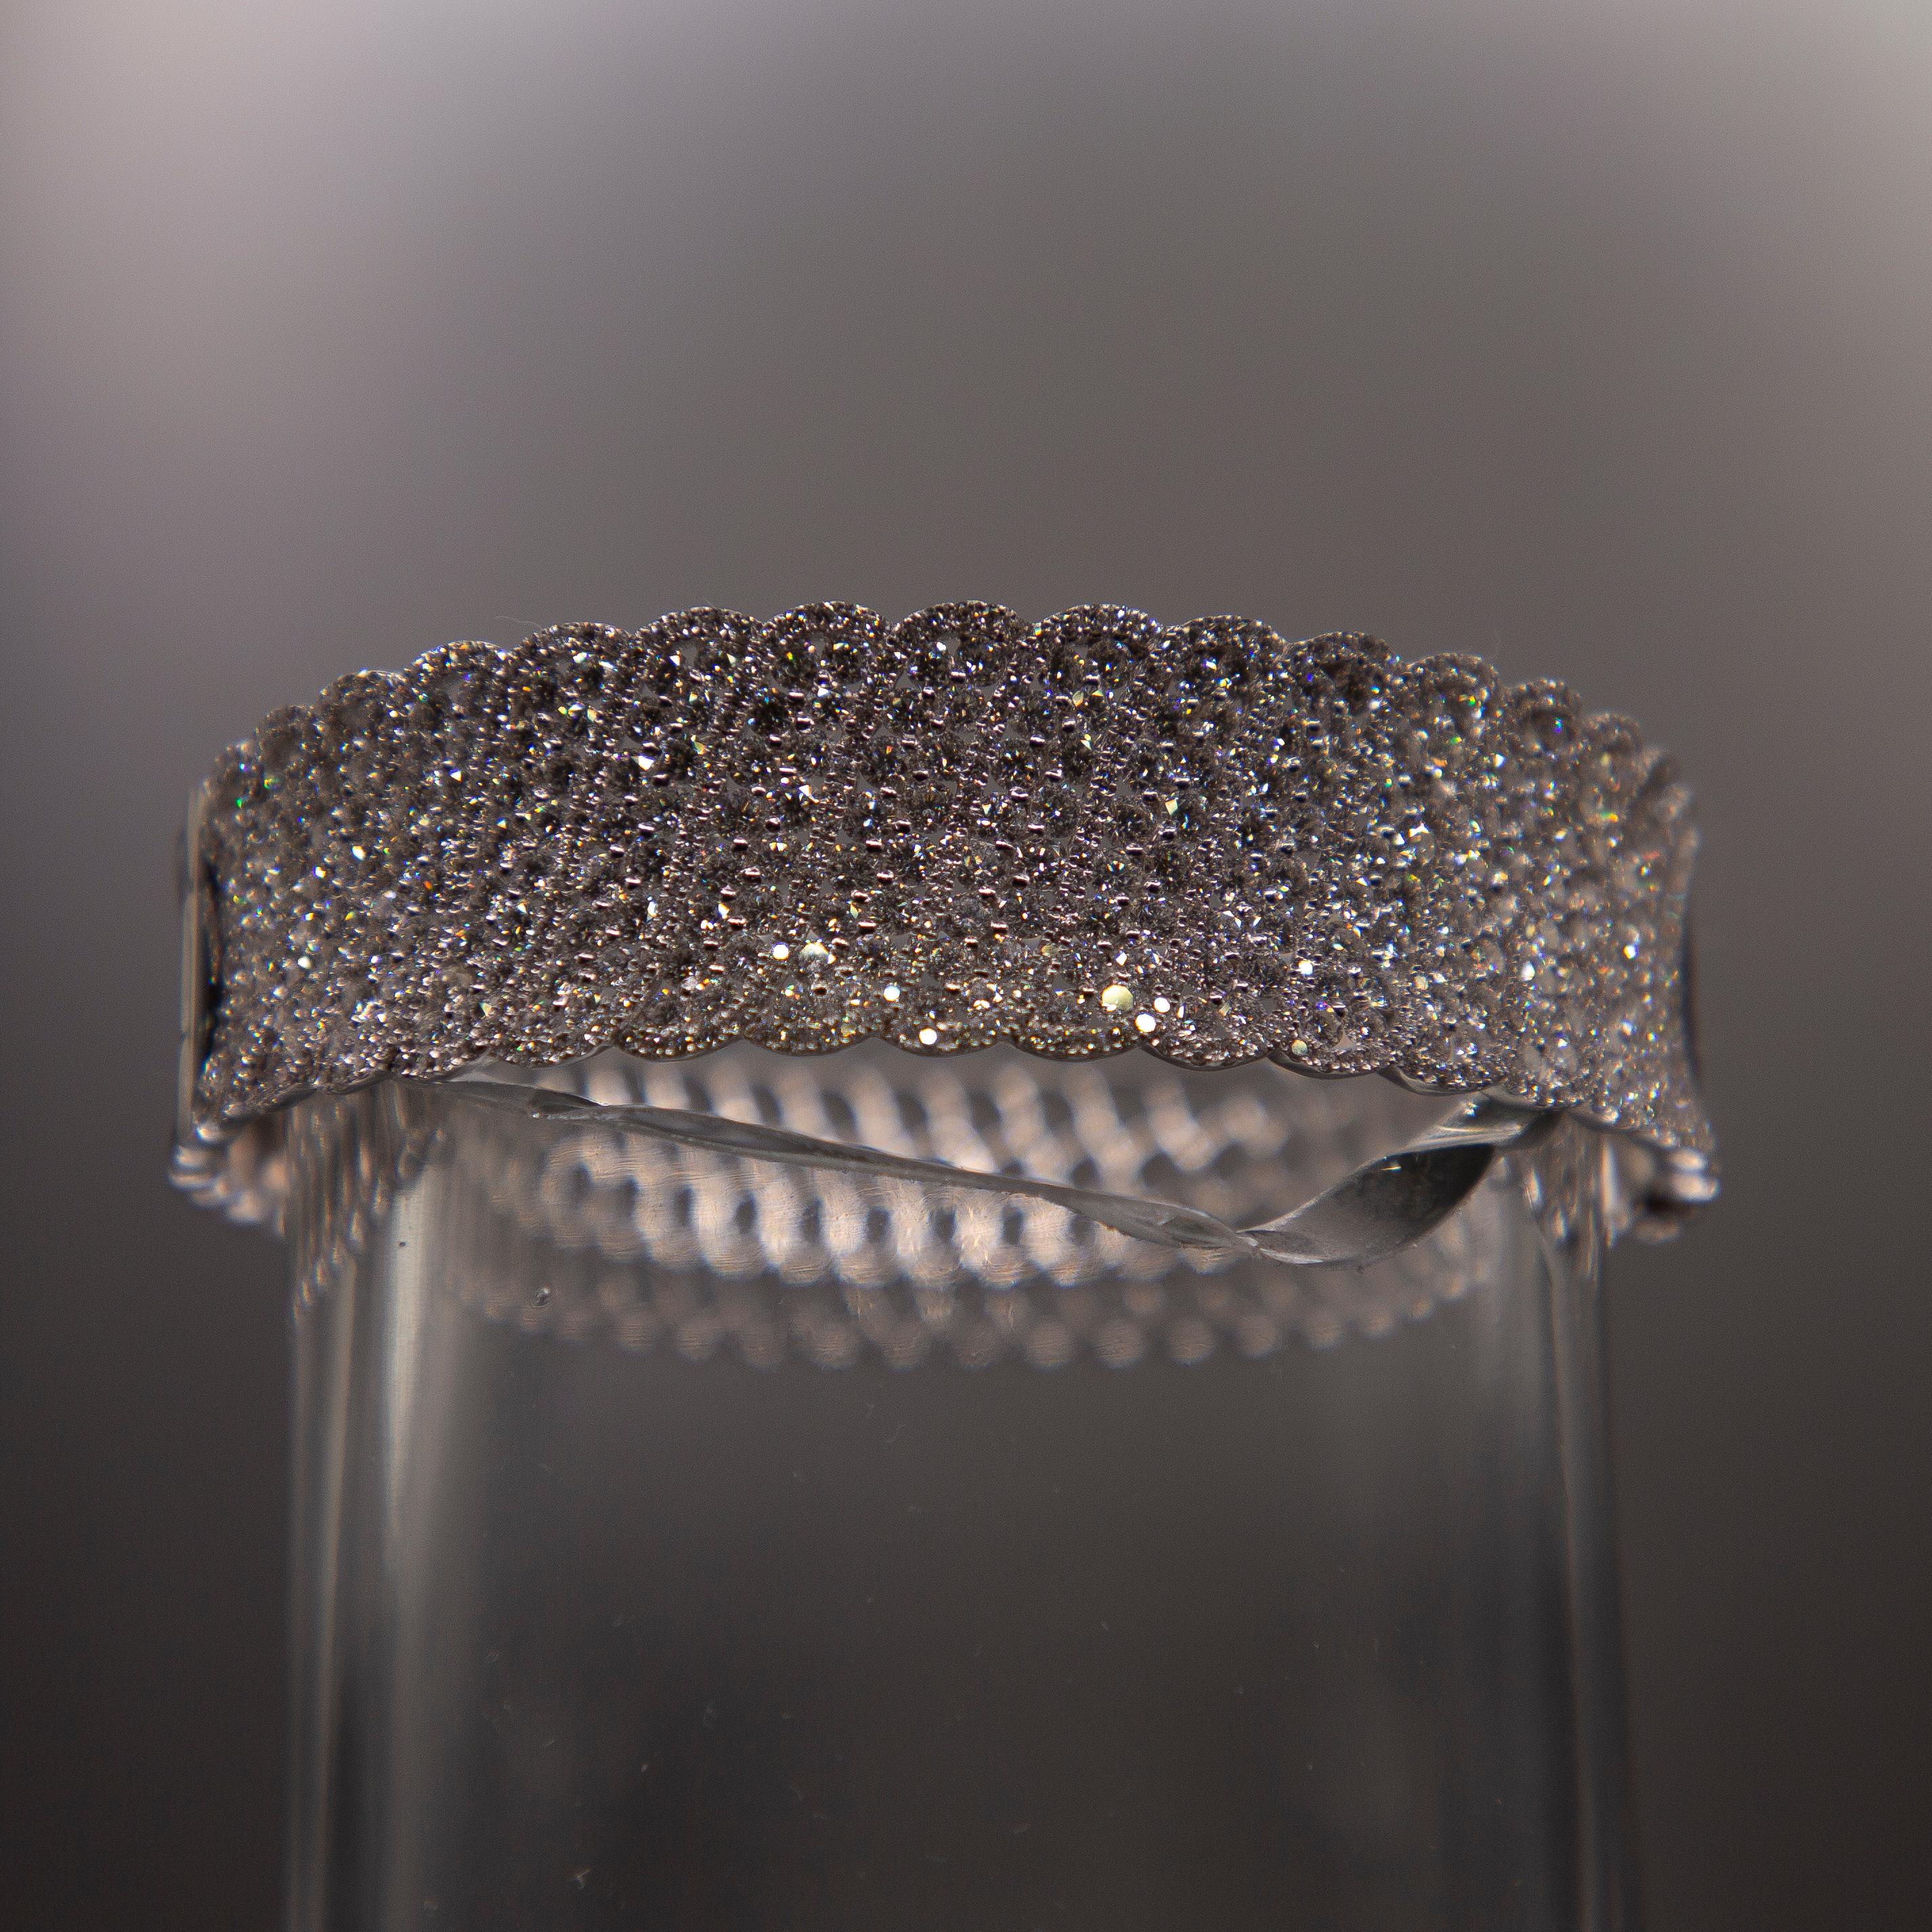 A meticulously fabricated, lacy 18k white gold weave is spectacularly set with 684 perfectly cut, top collection diamonds weighing 10.06 carats total. F VS1 quality. The setting is accomplished with a proprietary, centuries- old Italian technique